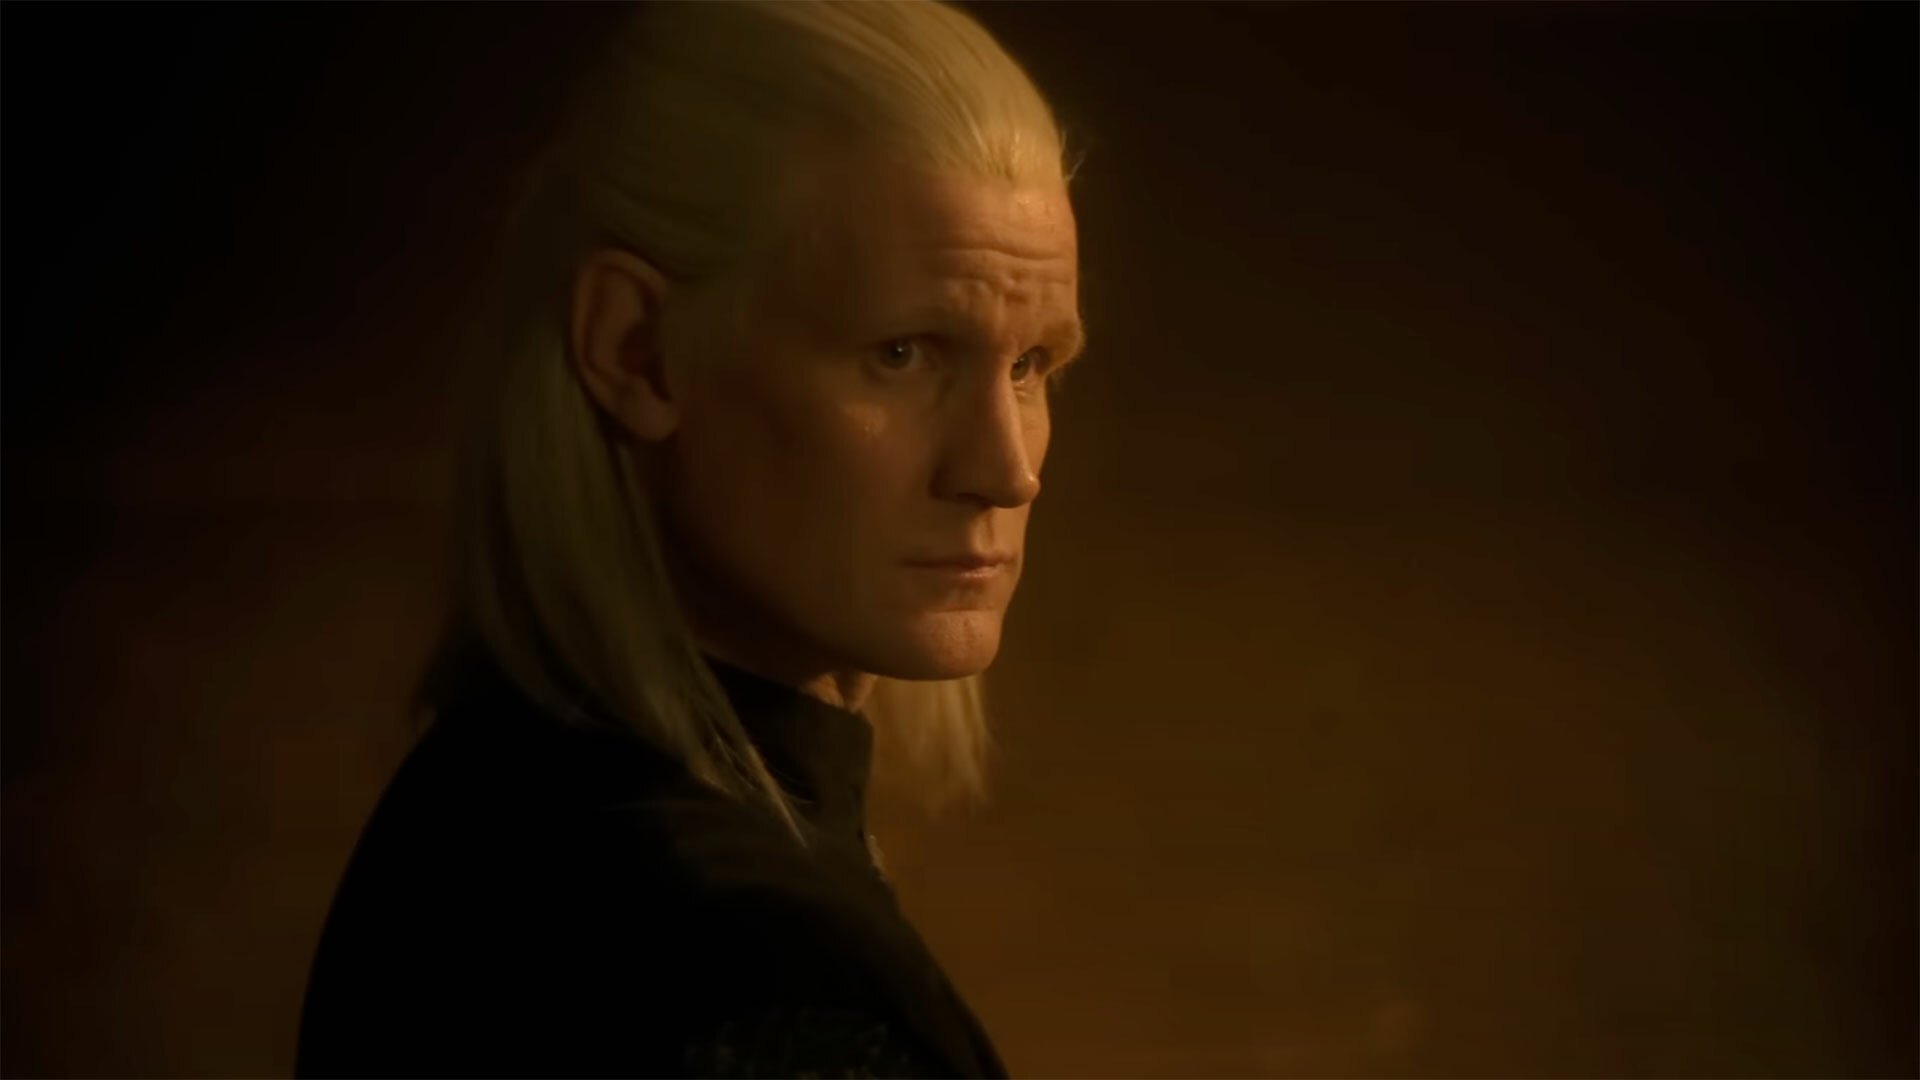 A man with long blonde hair stands in a dark room.